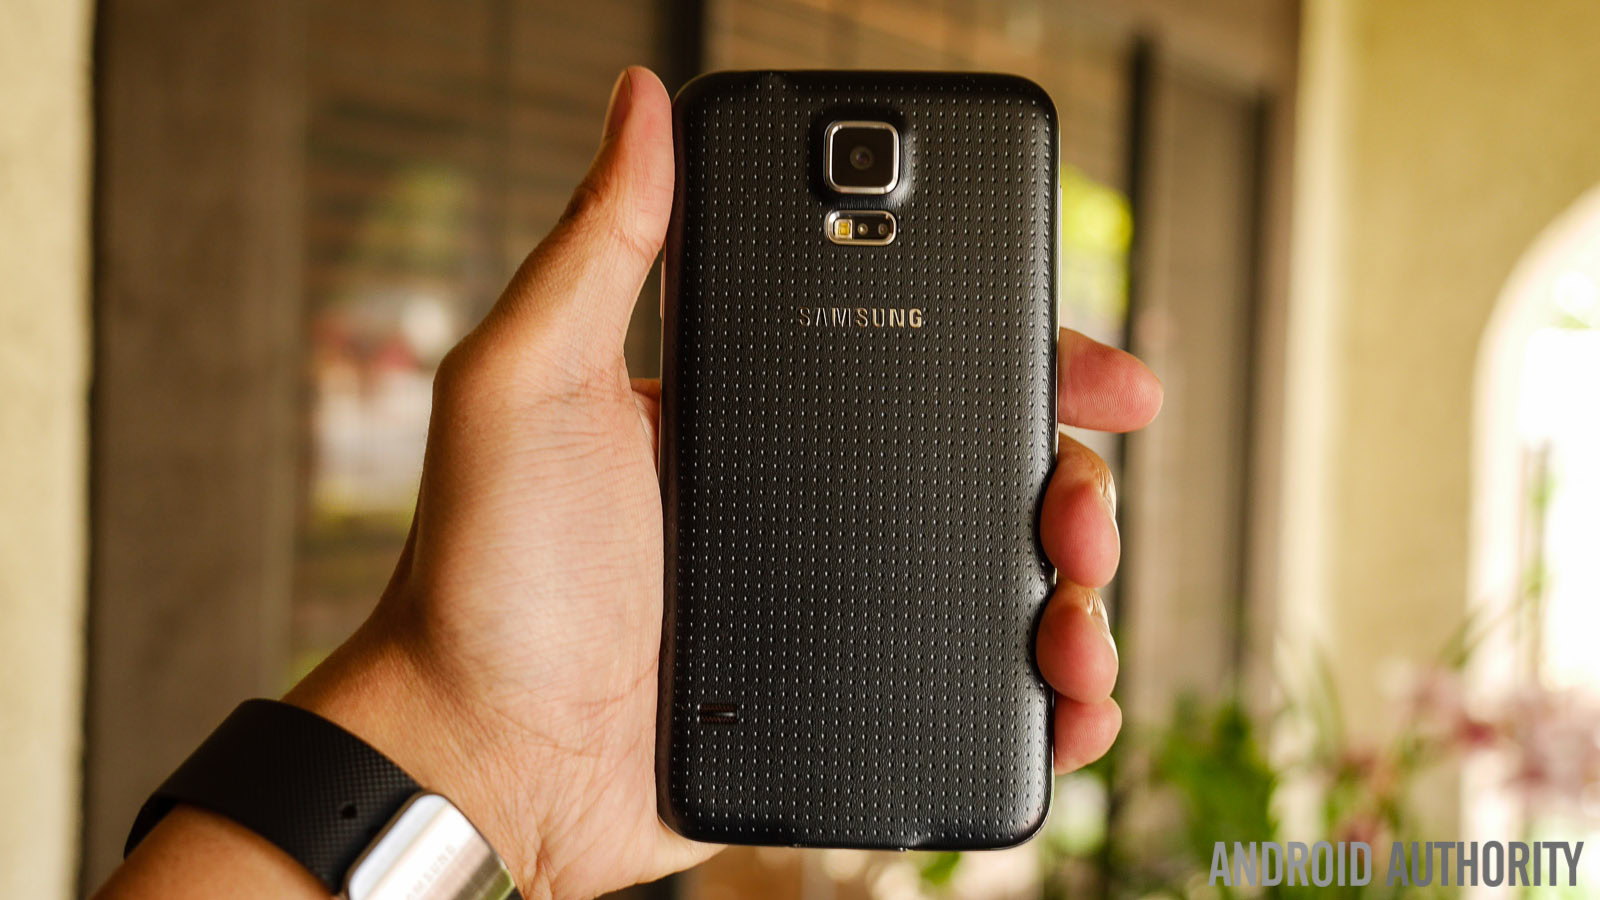 Many expected more from the Galaxy S5 than Samsung actually delivered.